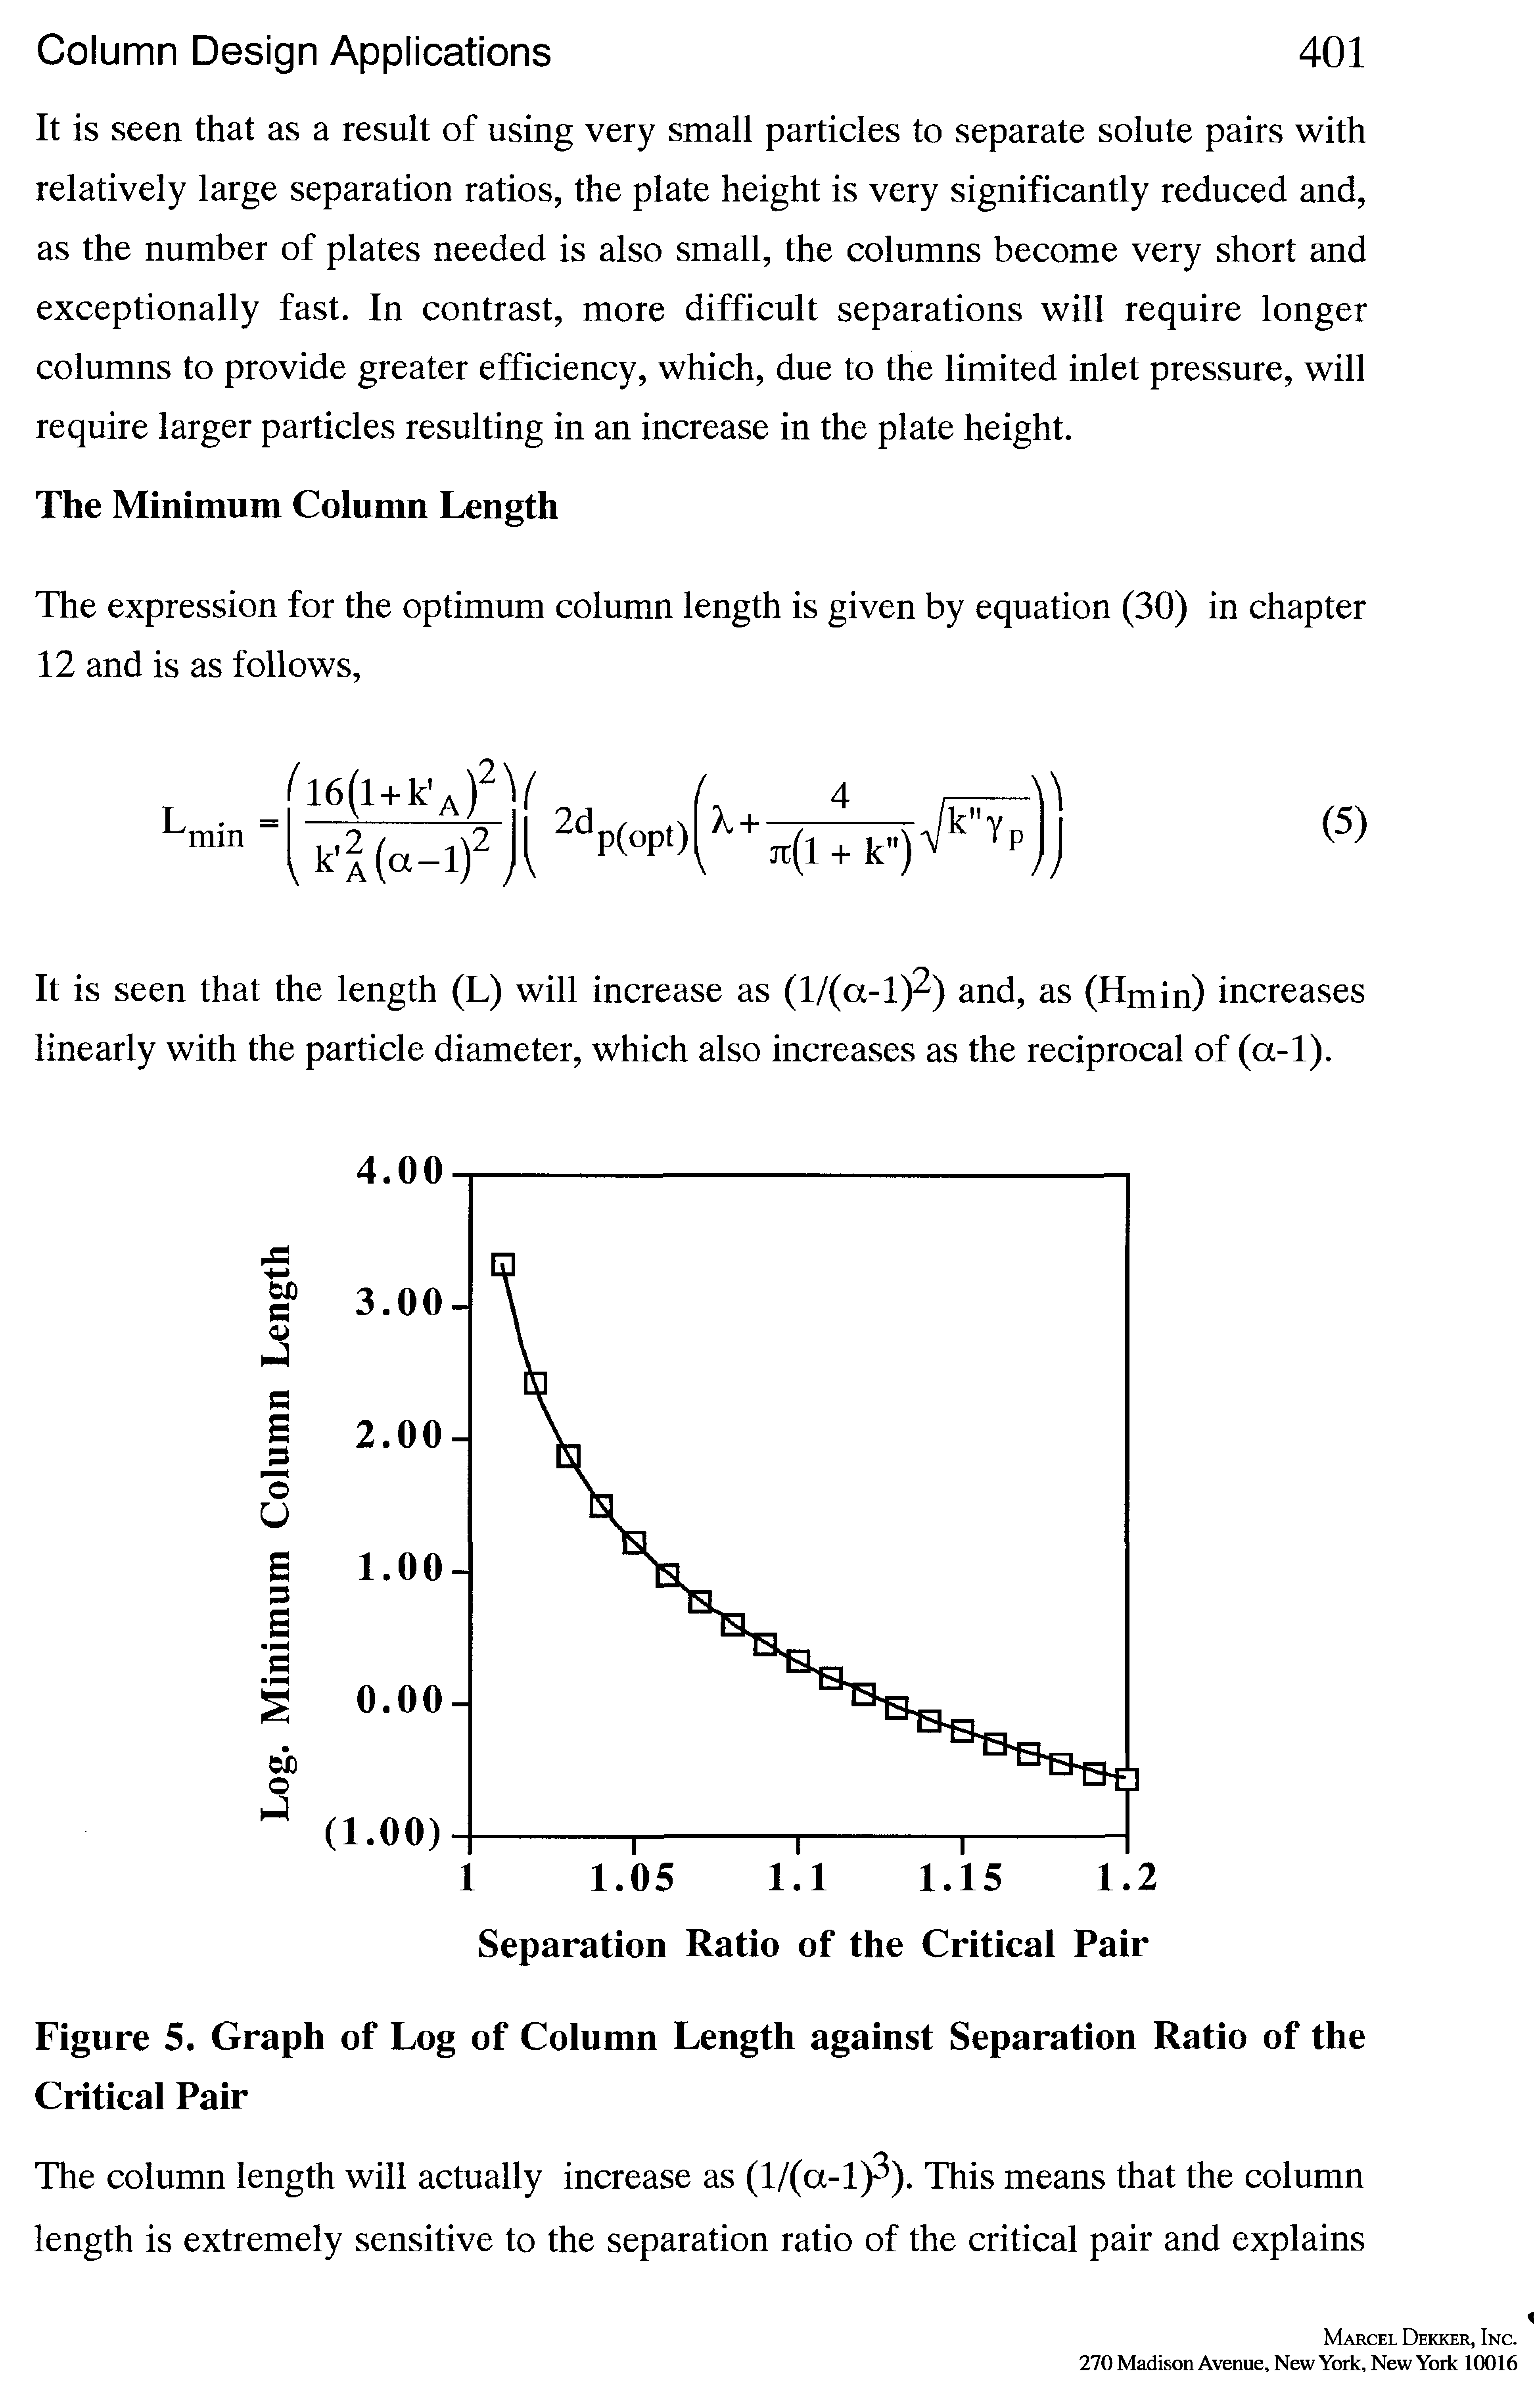 Figure 5. Graph of Log of Column Length against Separation Ratio of the Critical Pair...